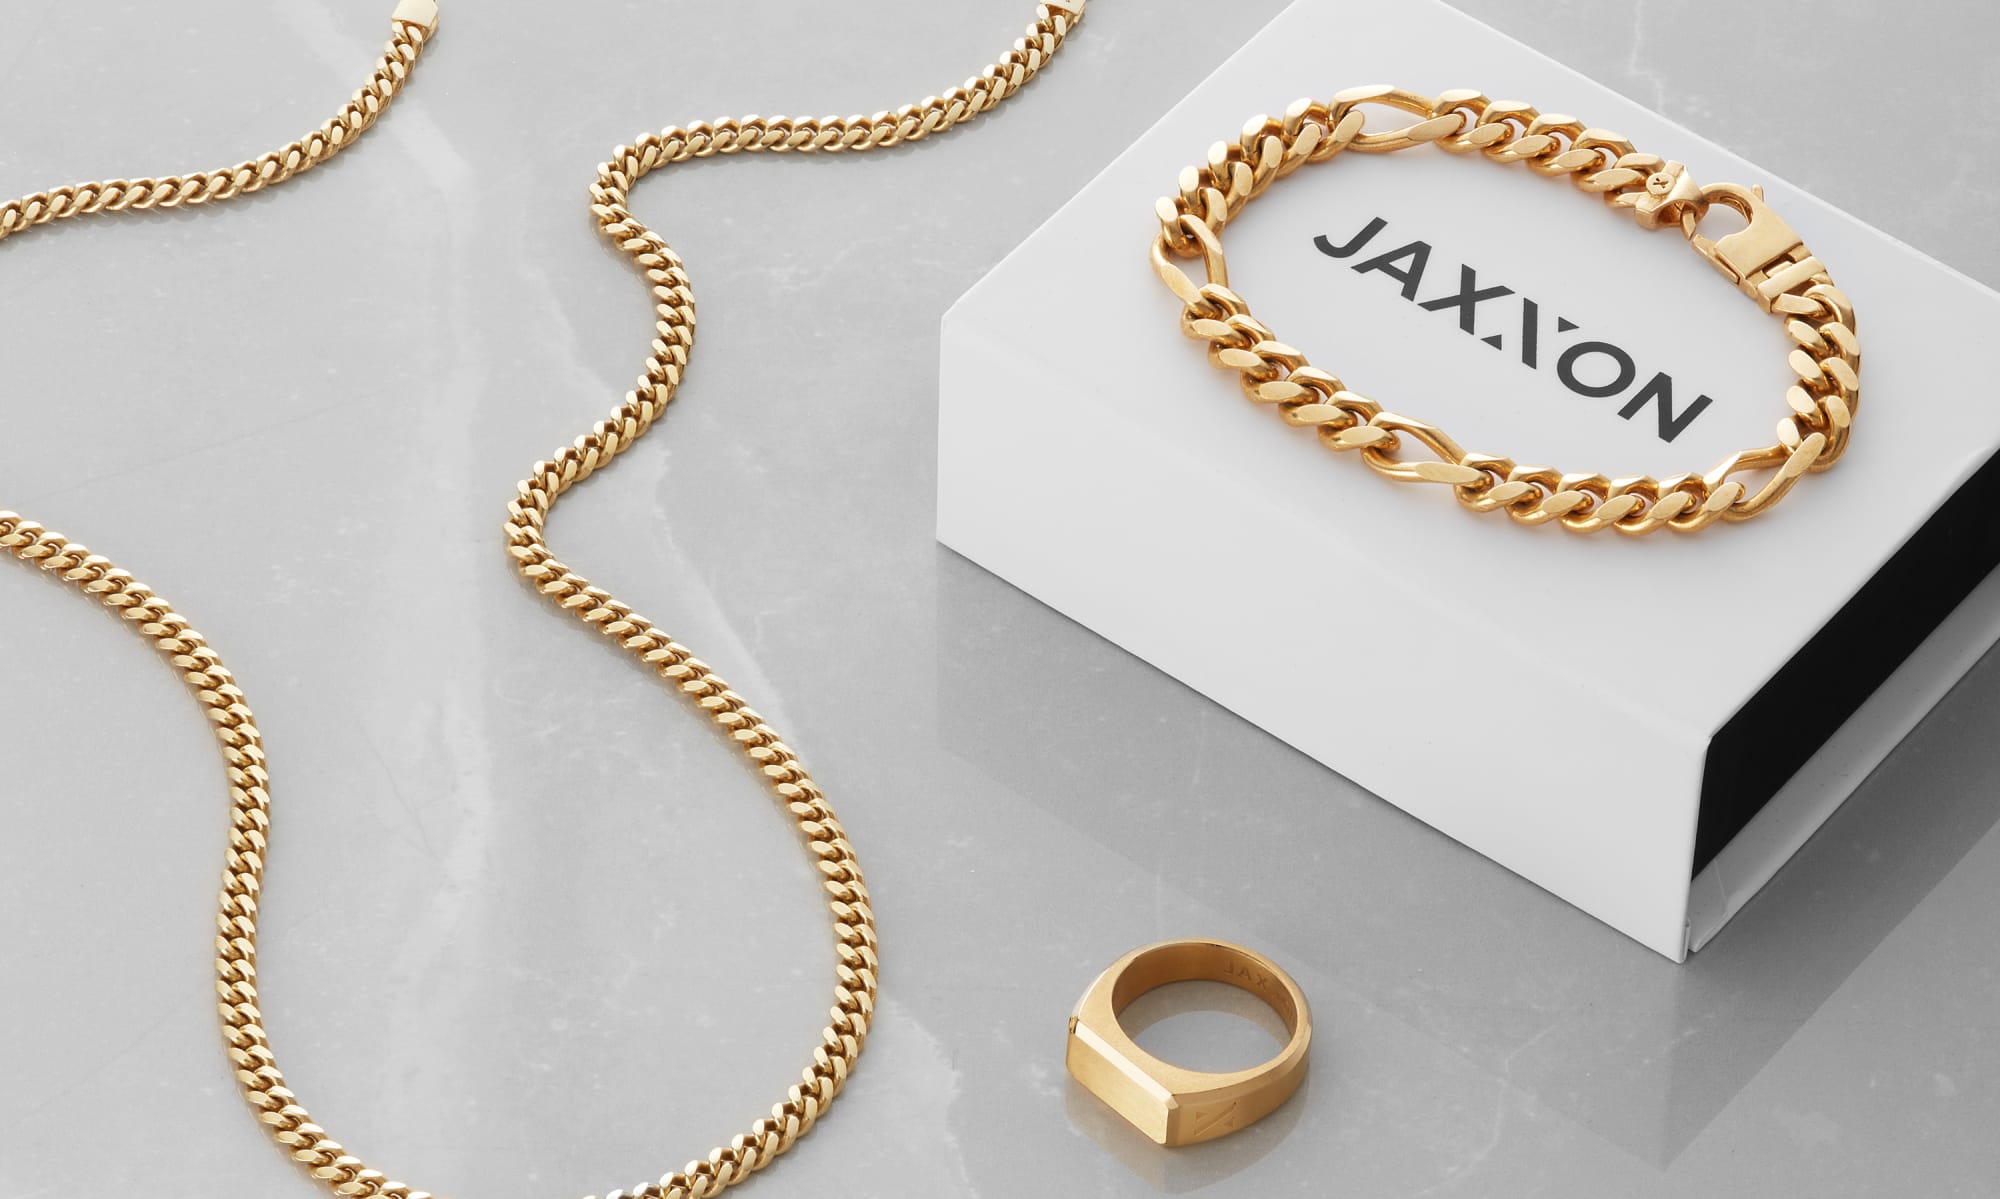 JAXXON's Gold Cuban Link Chain, Figaro Bracelet, and Signet Ring laying on a grey marble surface with a JAXXON gift box.